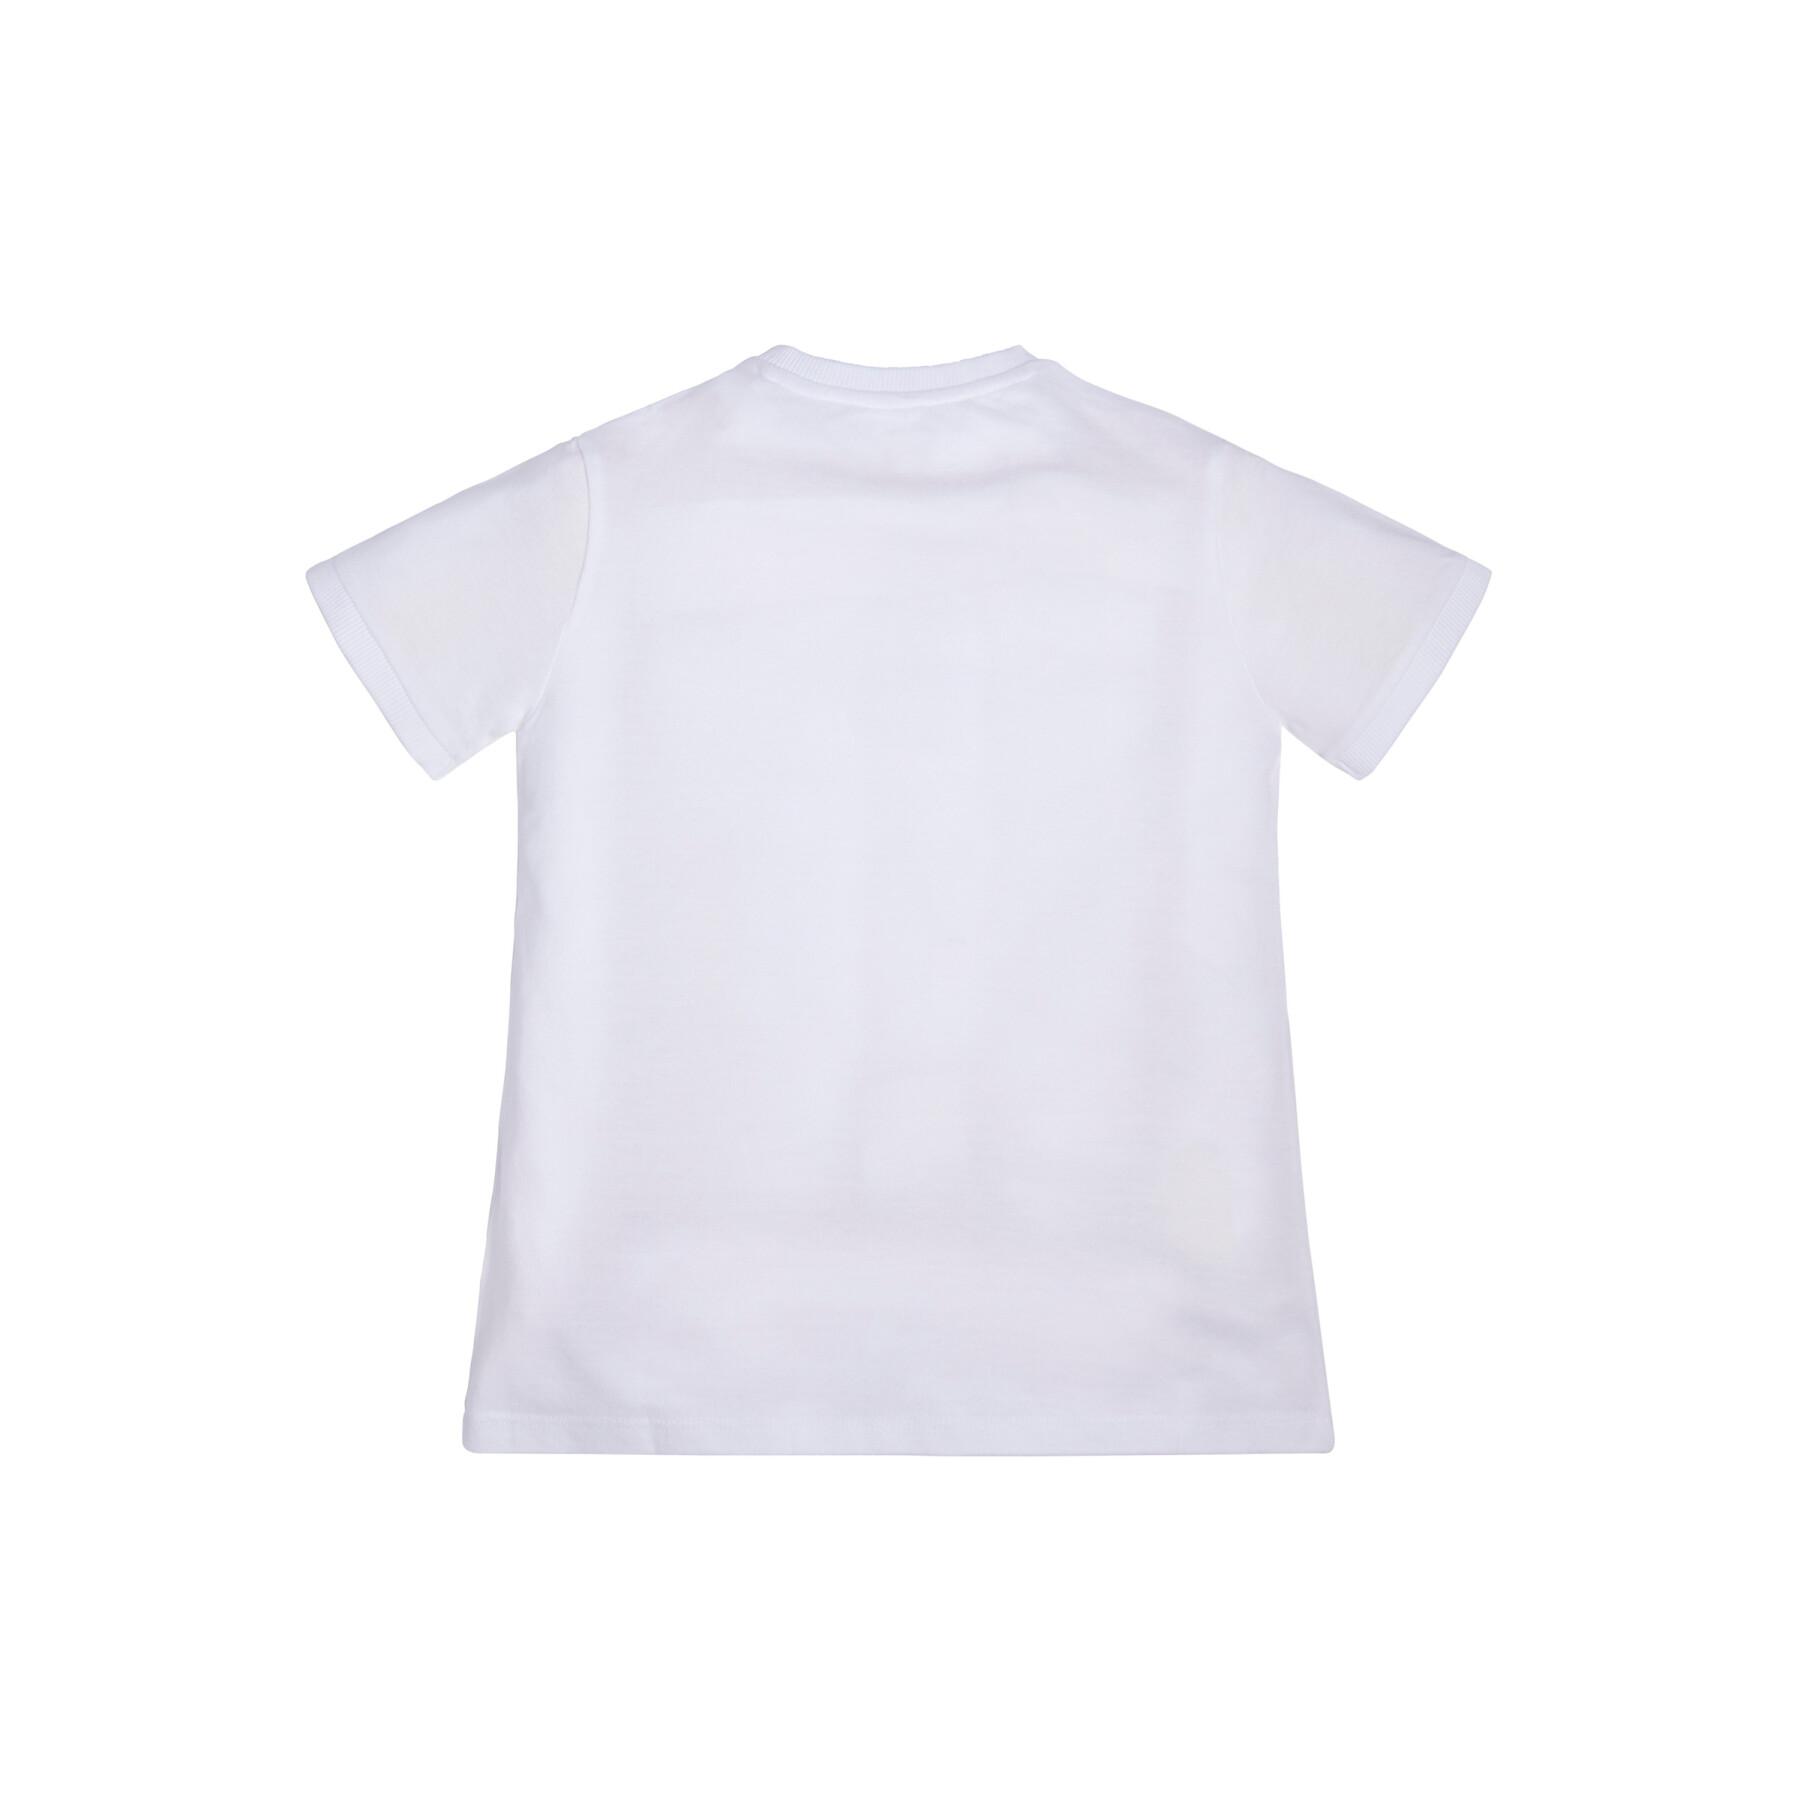 Kinder-T-shirt Guess Ceremony